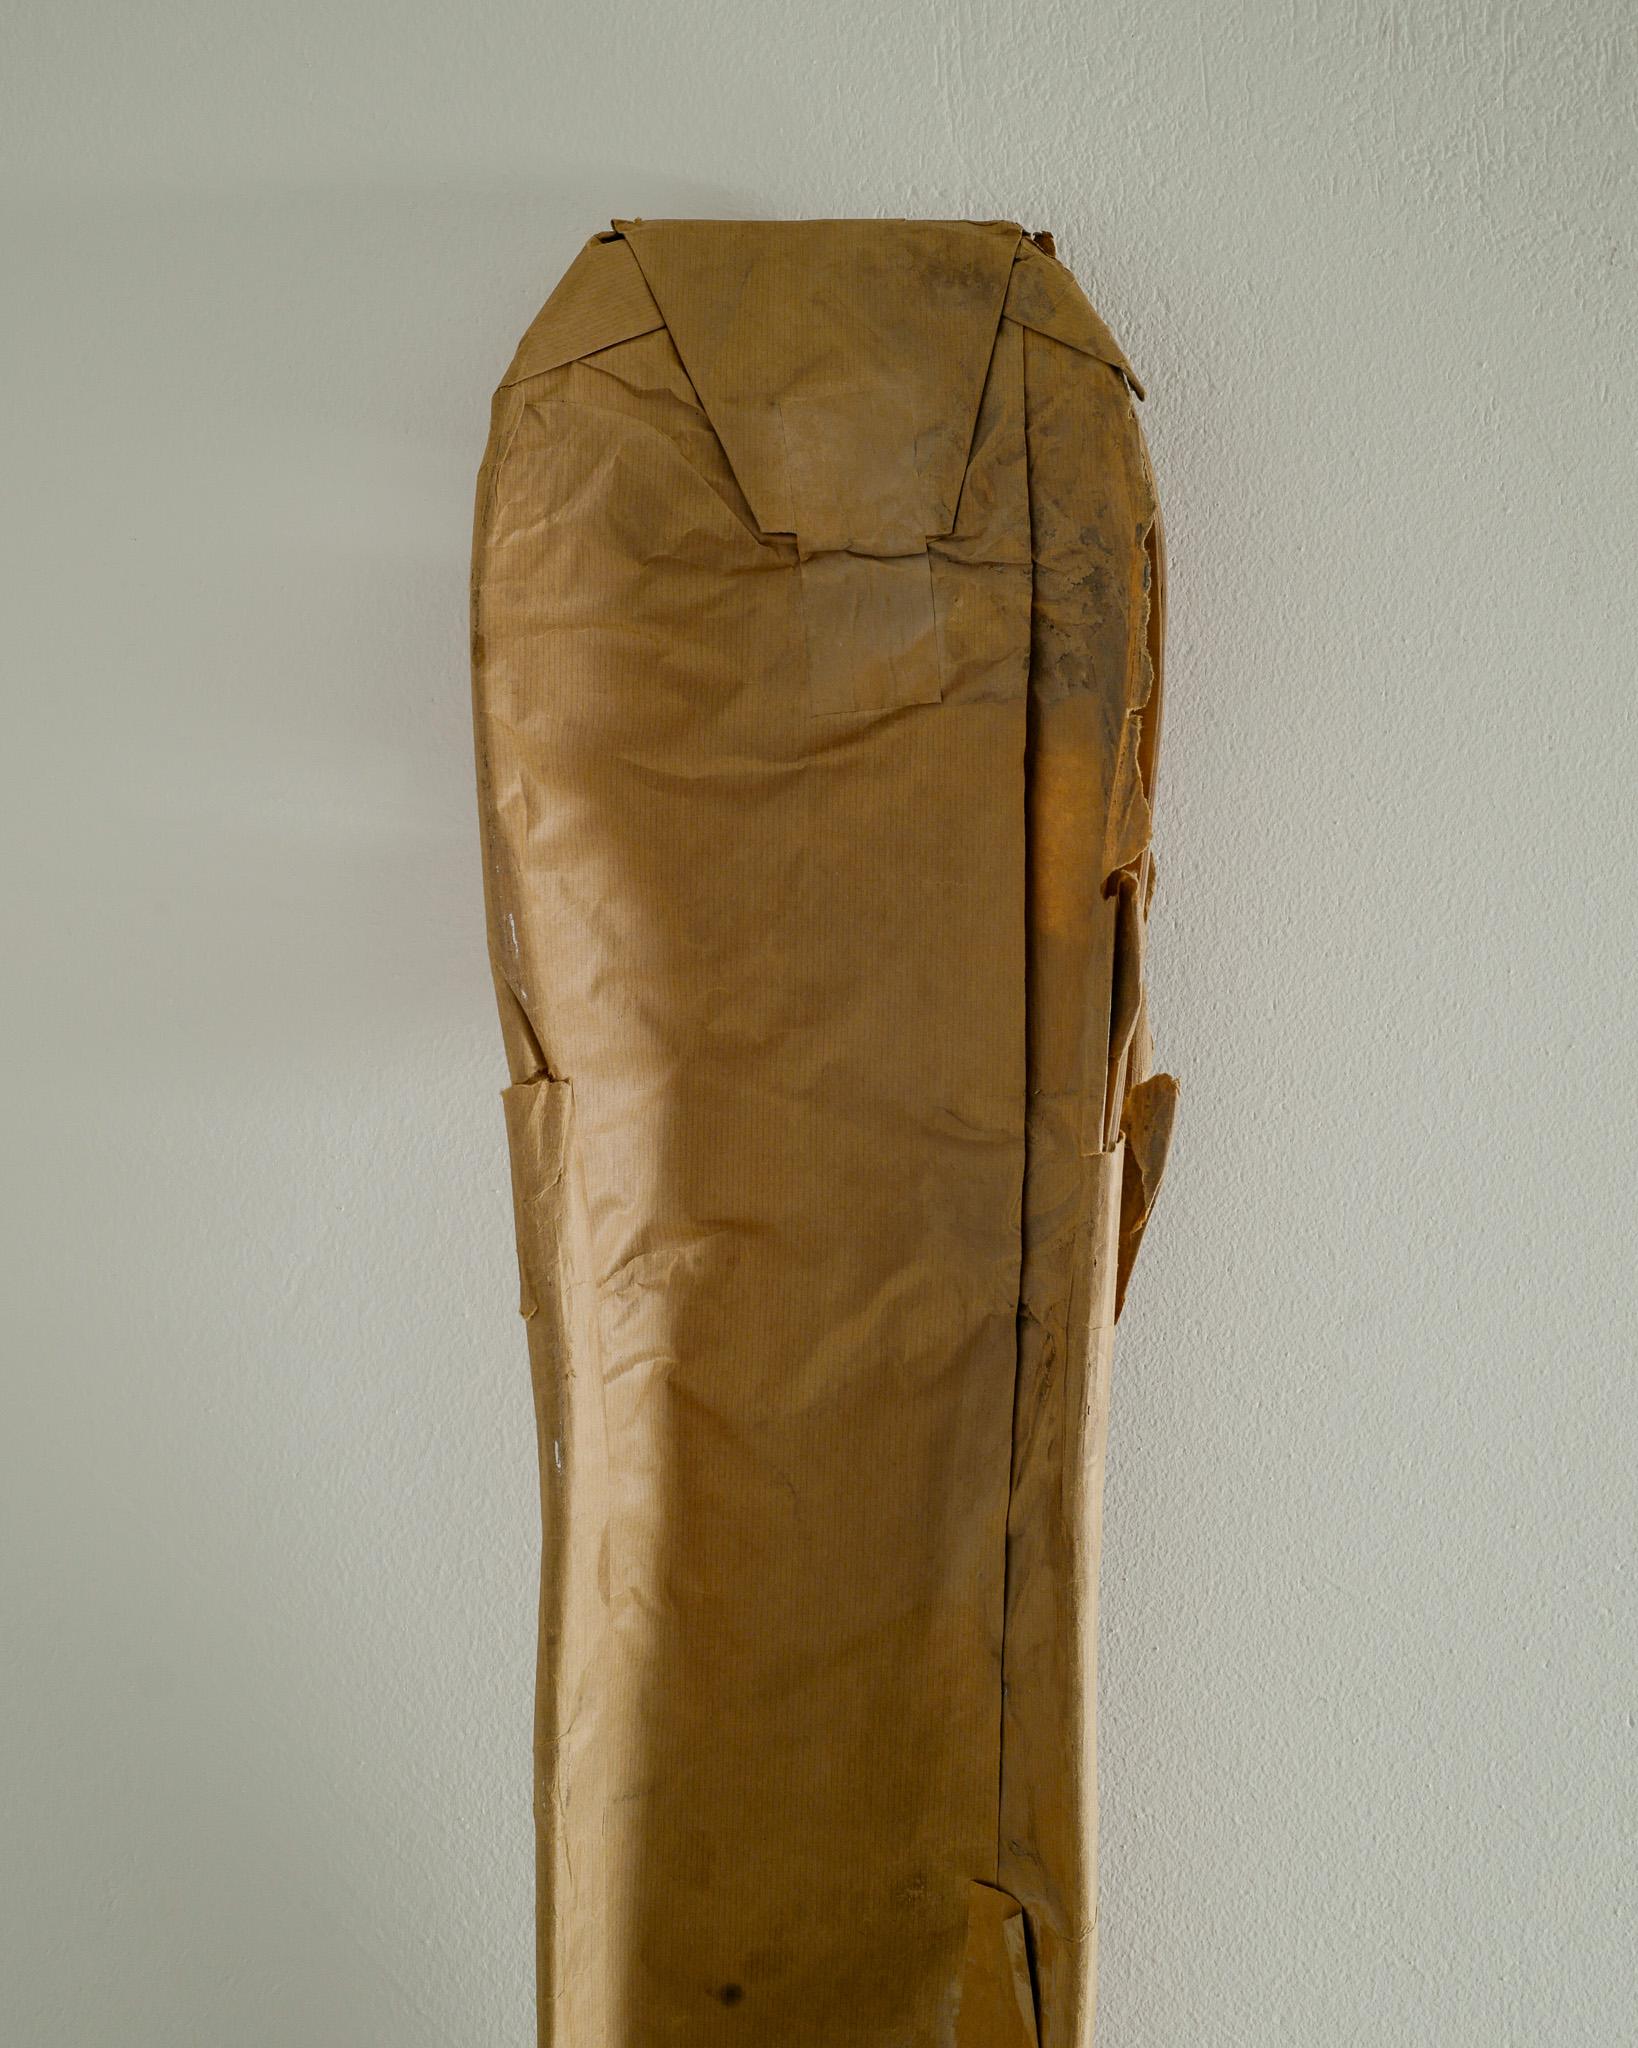 Mid-Century Modern Original Charles & Ray Eames Mid Century Leg Splint in Molded Plywood, 1943 For Sale